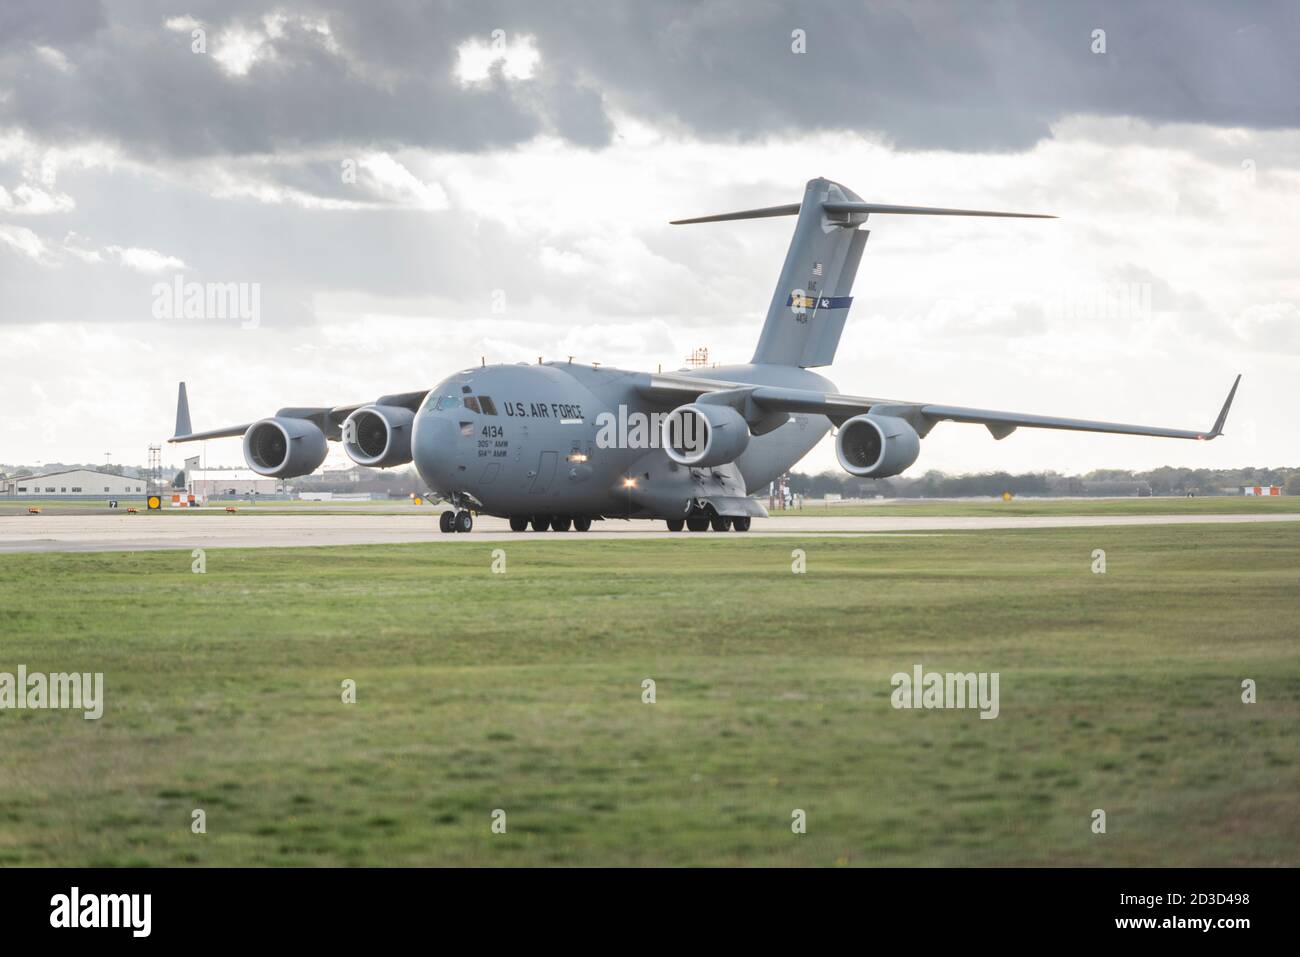 A USAF US Air Force C17 globetrotter transport plane taxiing on the runway at RAF Lakenhealth UK Stock Photo